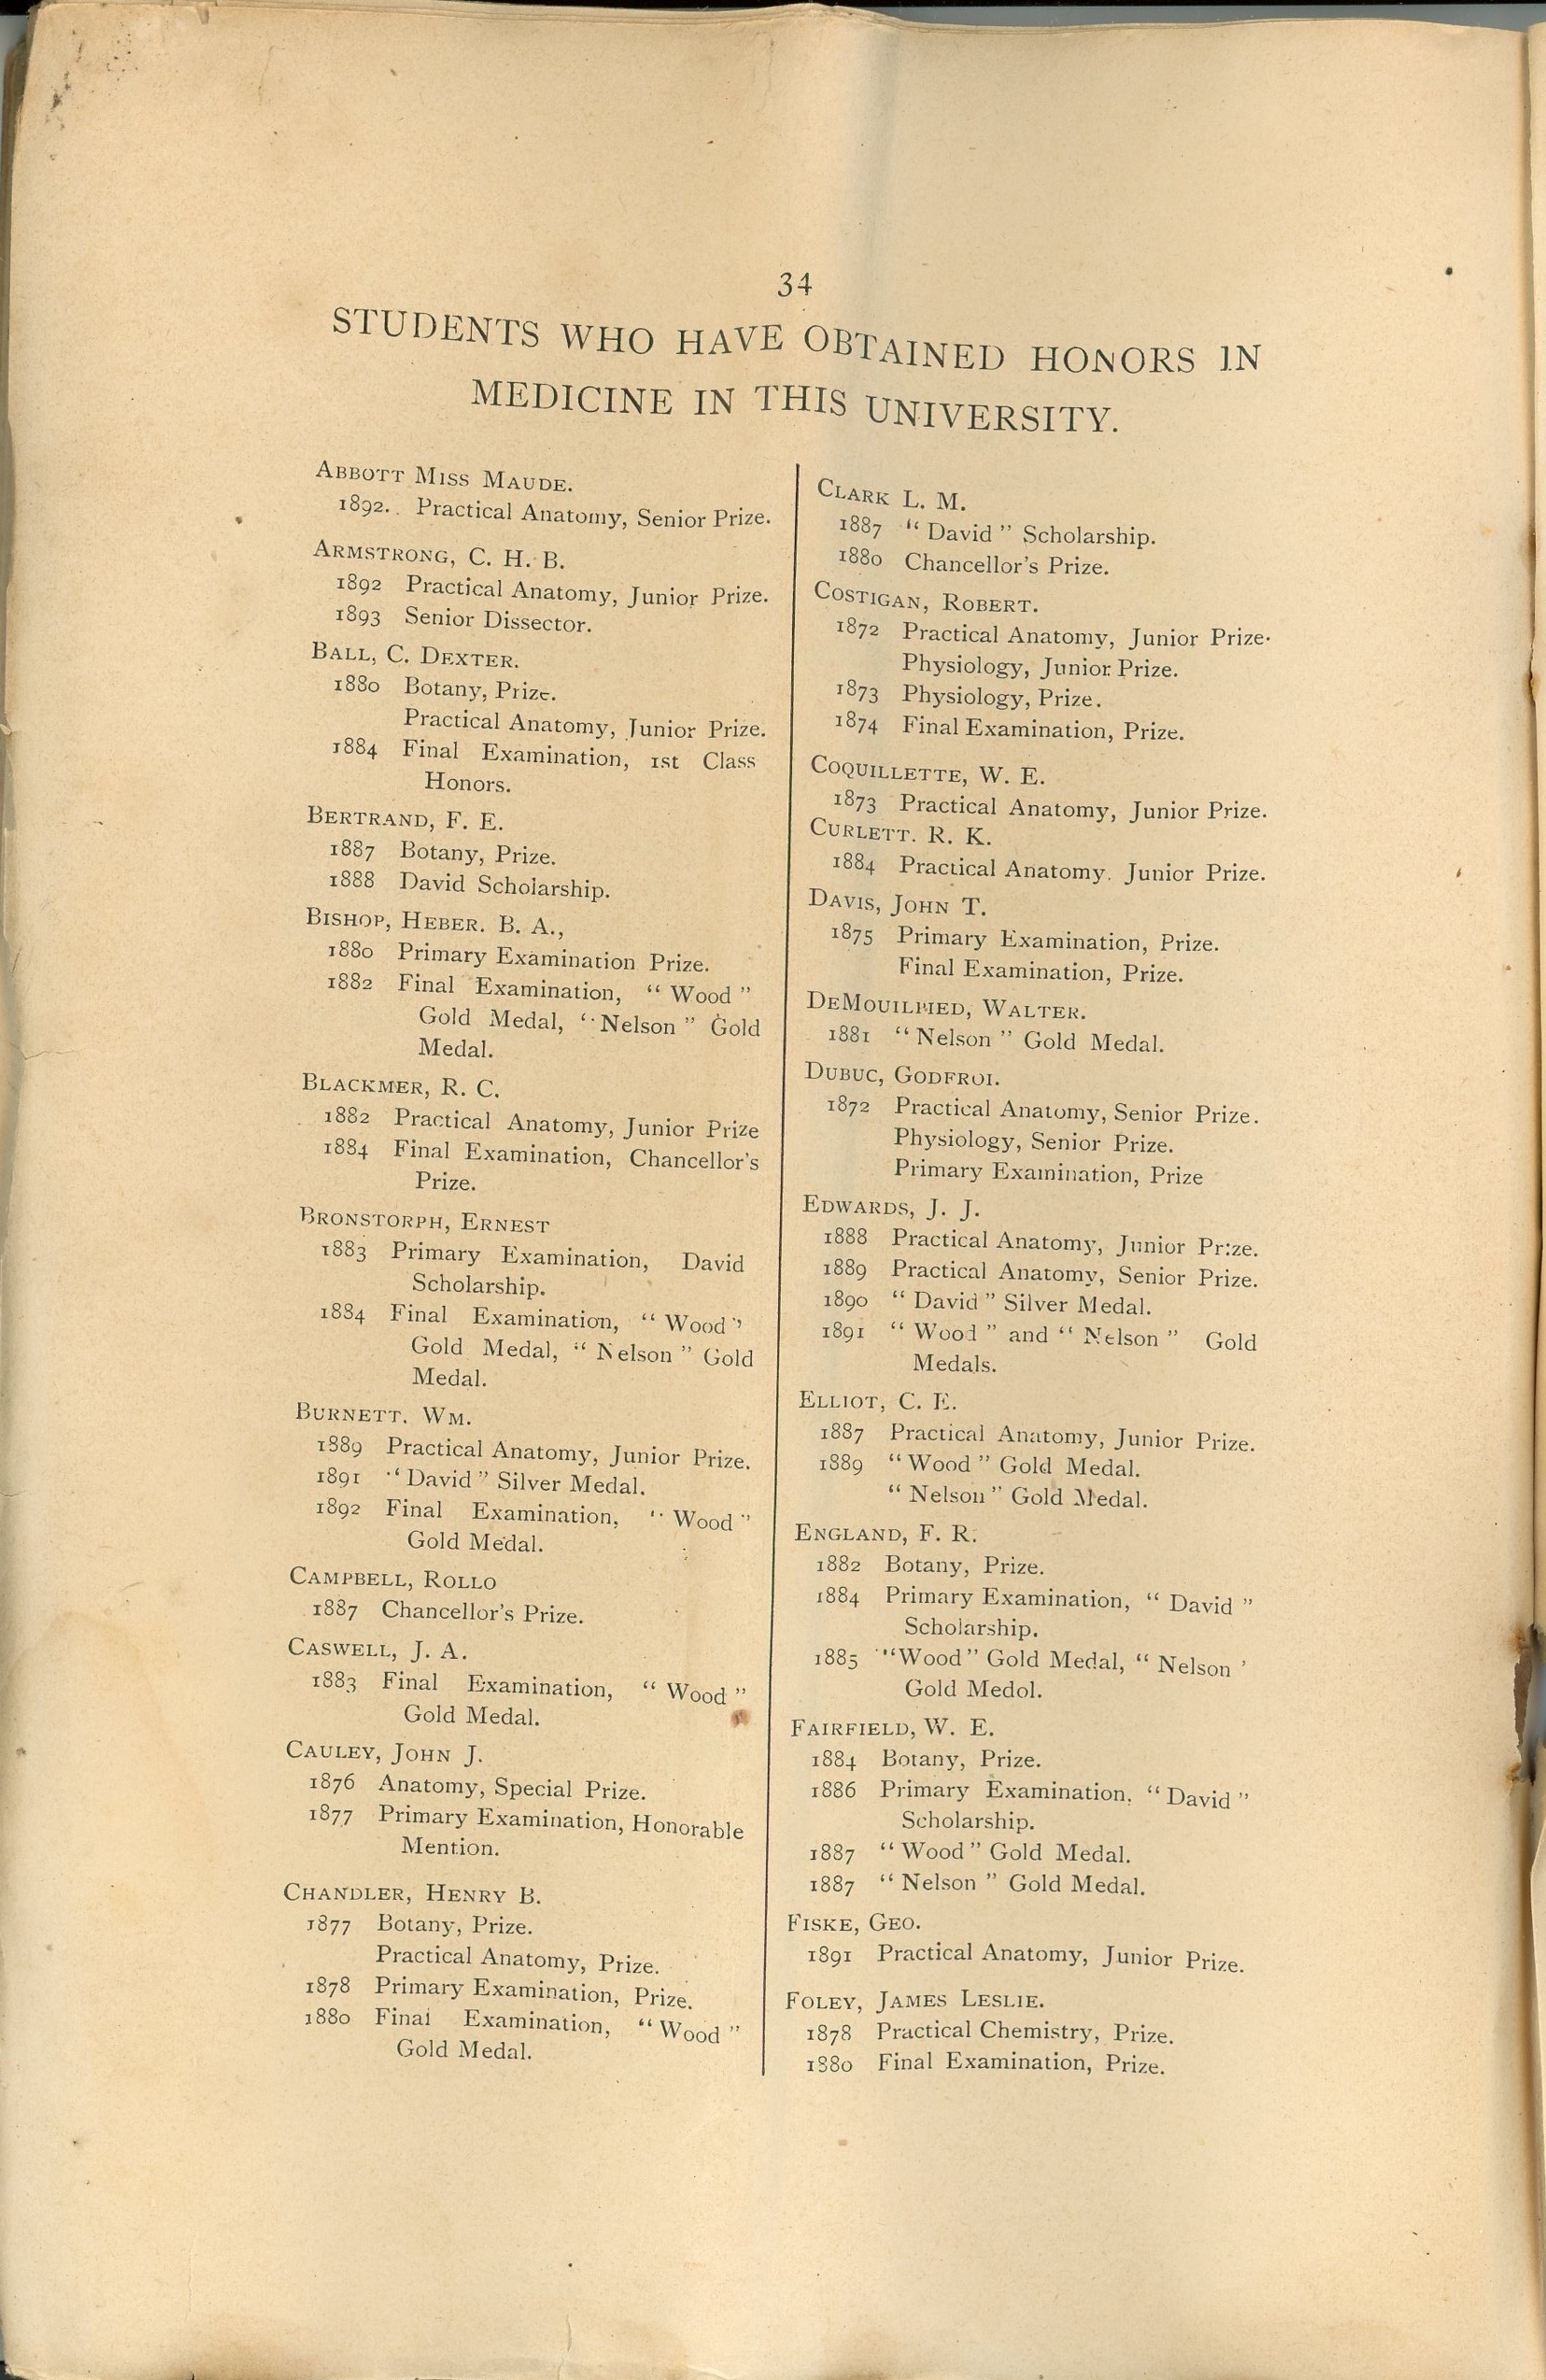 Page 34 of the University of Bishop’s Collage booklet, sepia. This page presents a list of students having obtained honours in medicine at Bishop’s. The top of the page reads: “Students who have obtained Honors in Medicine in this University”. The list of students is in two columns, and the first name is “ABBOTT, Miss Maude – 1892. Practical Anatomy, Senior Prize.”